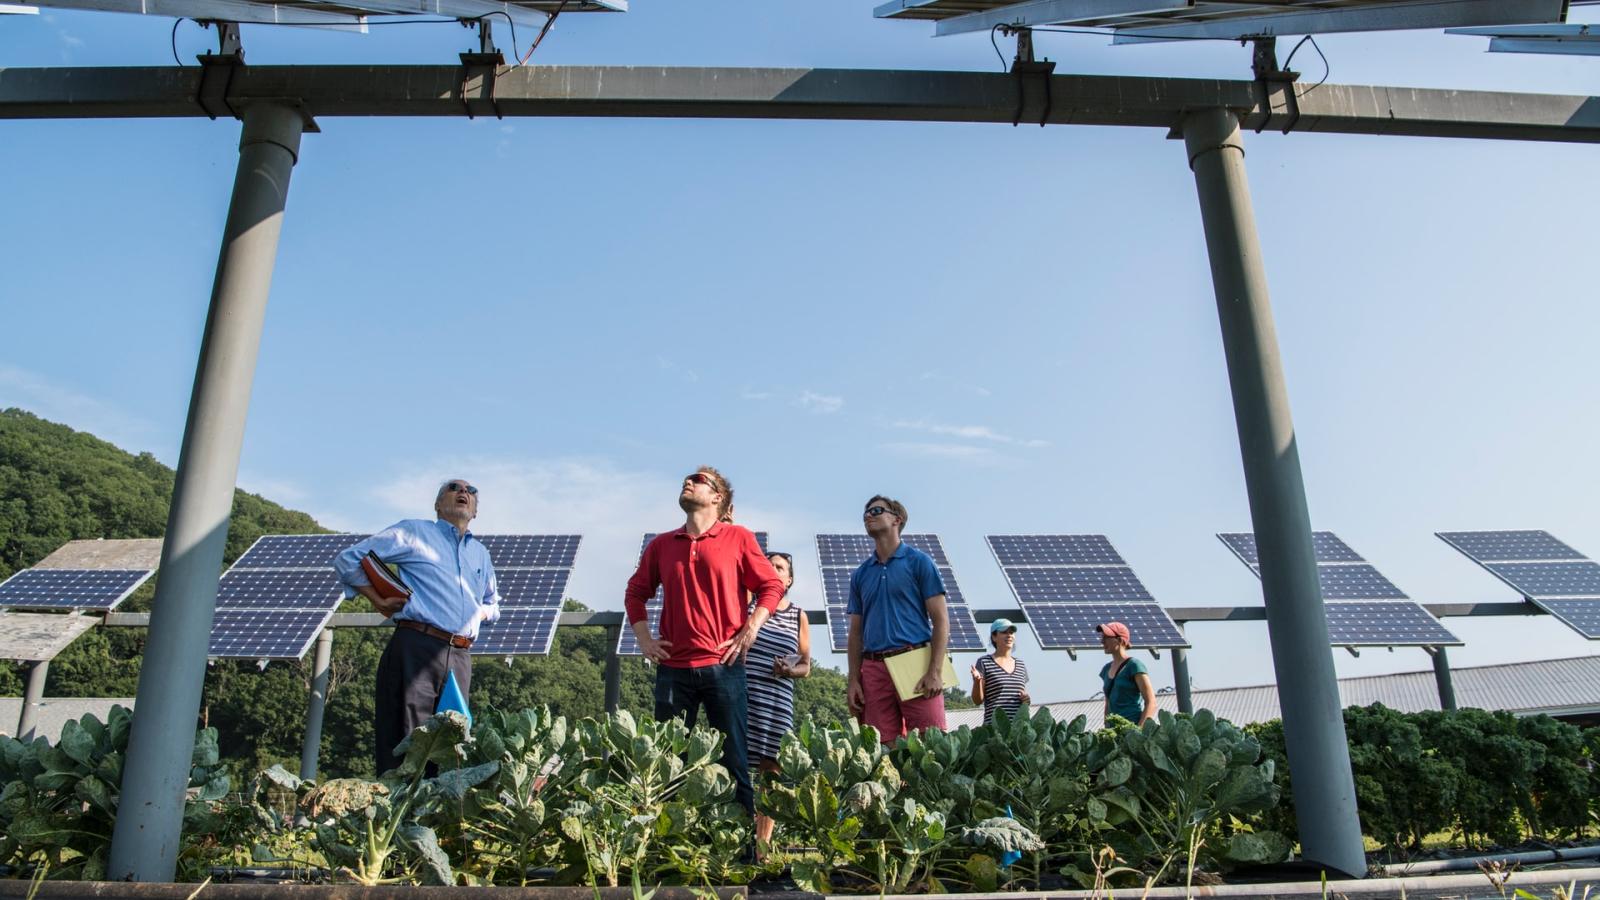 People and solar panels in a garden